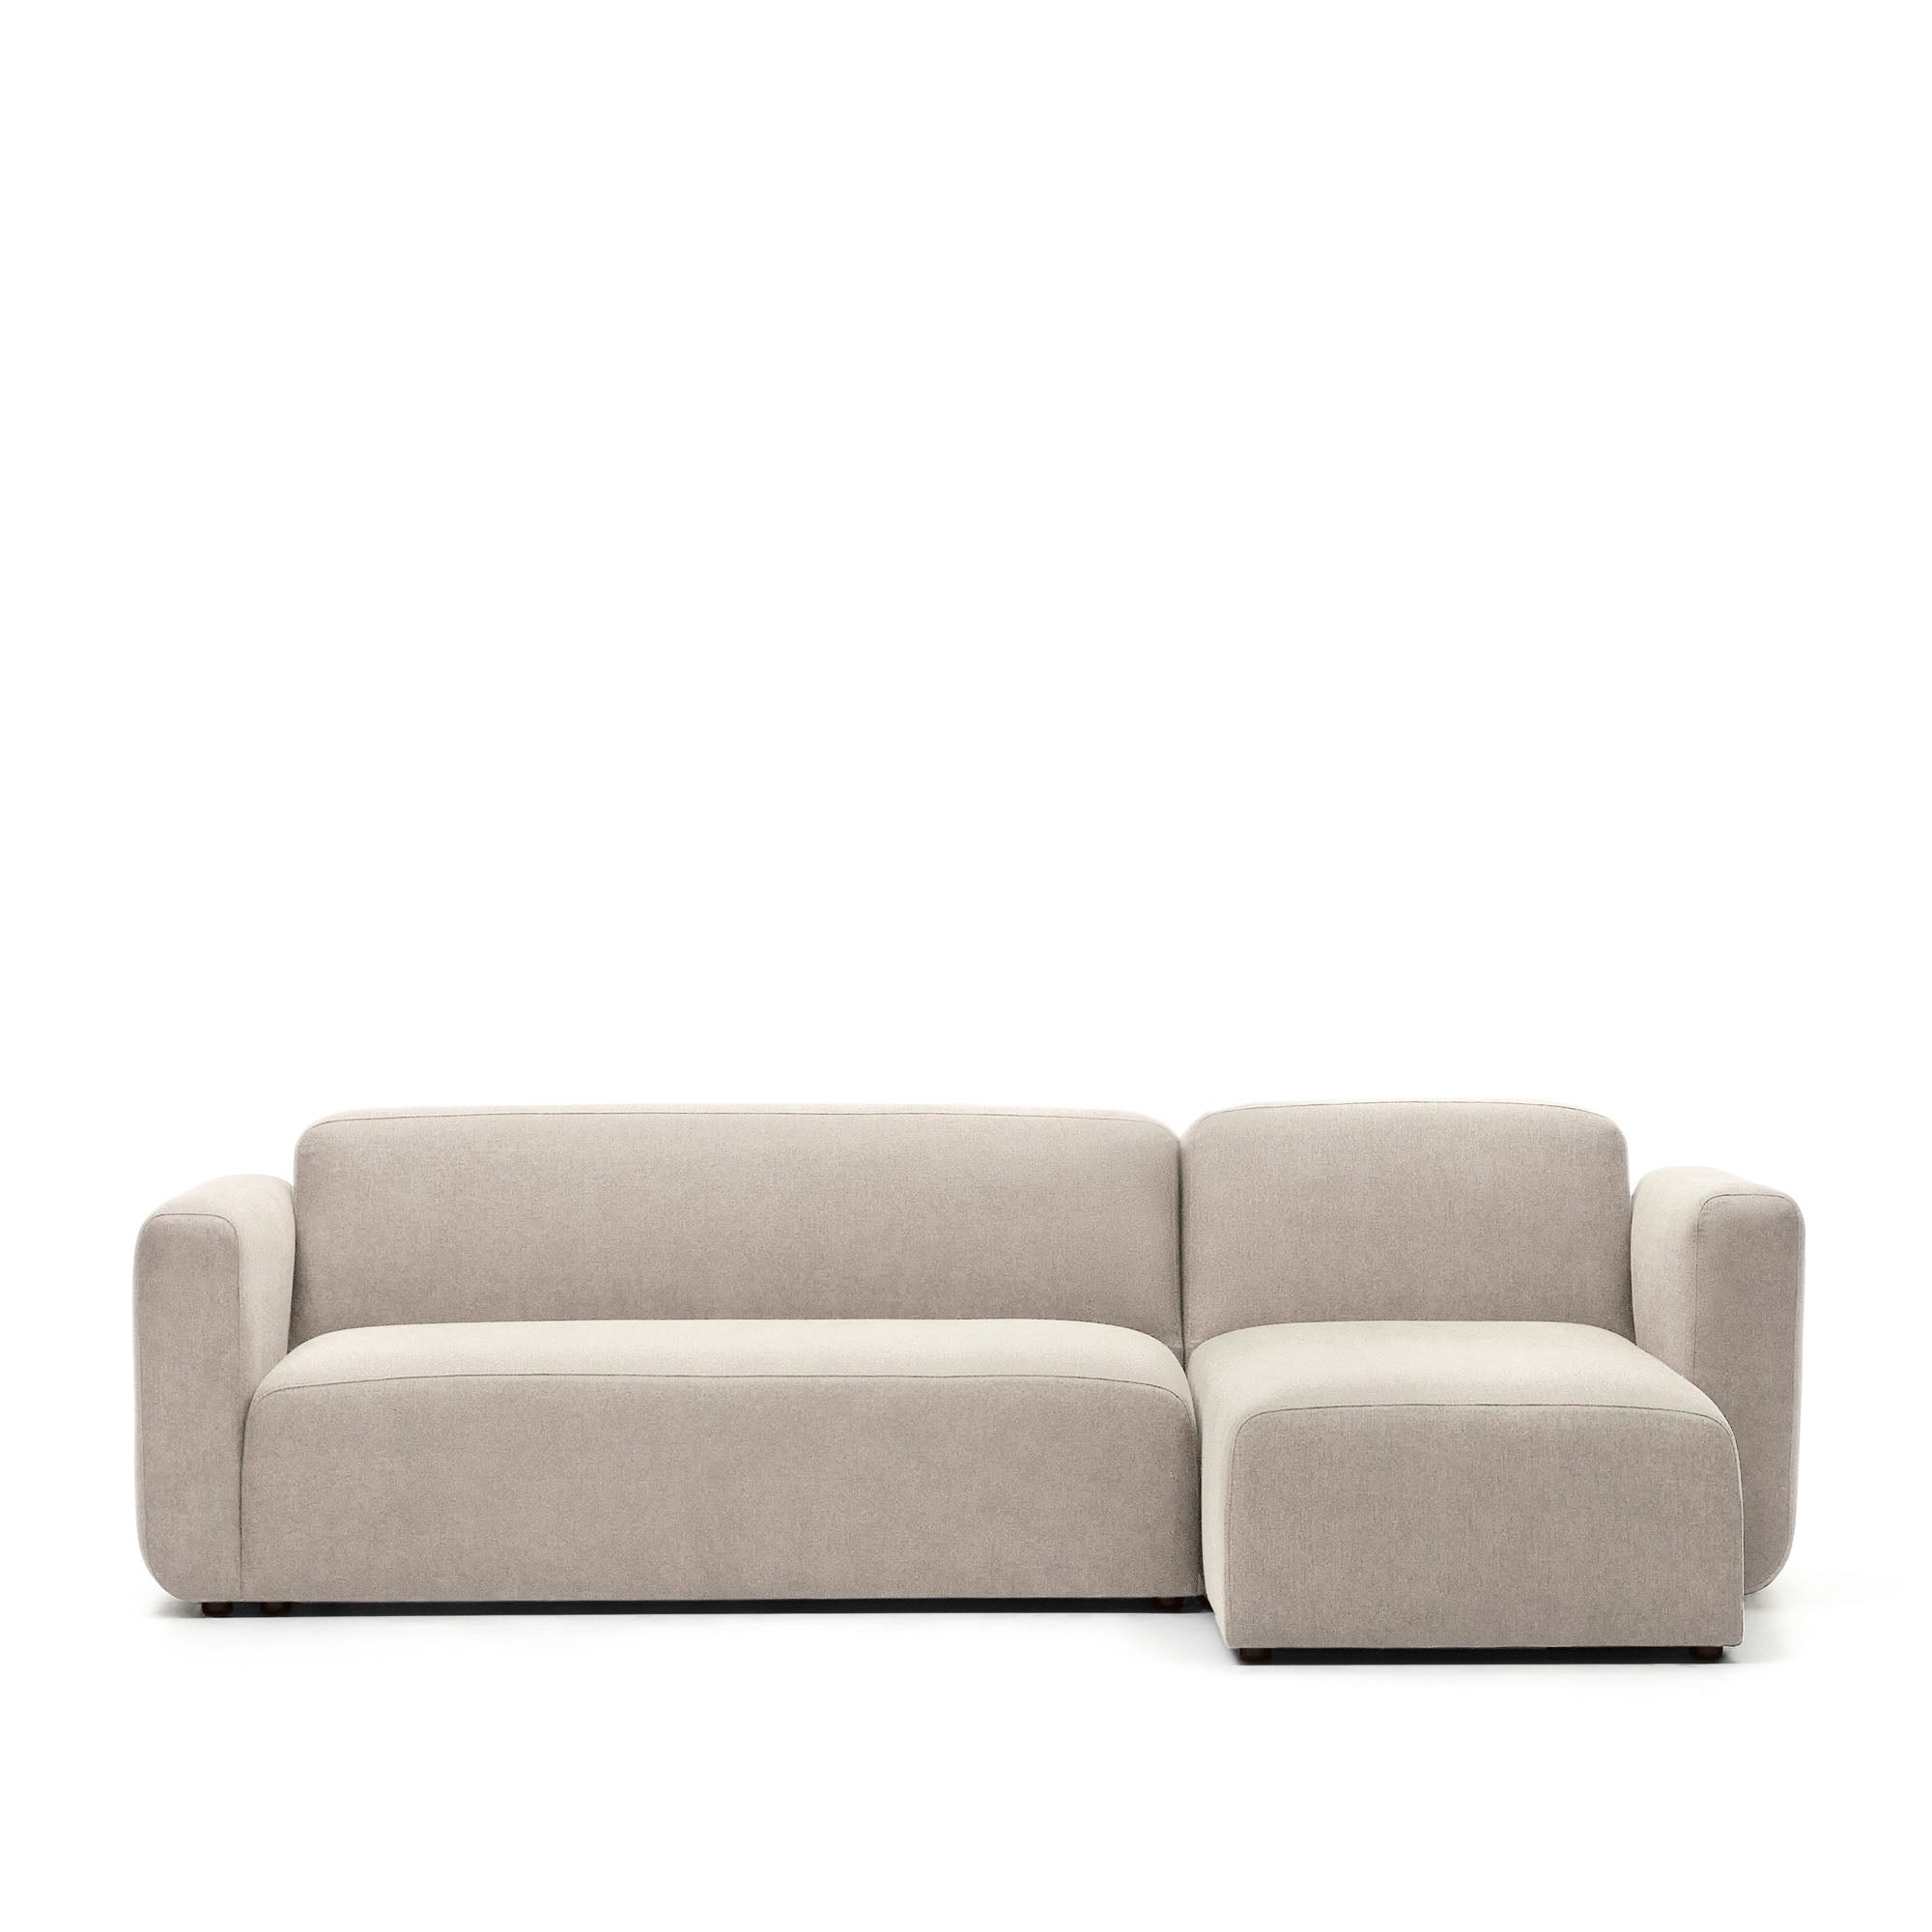 Neom 3 seater modular sofa, right/left chaise longue in beige, 263 cm